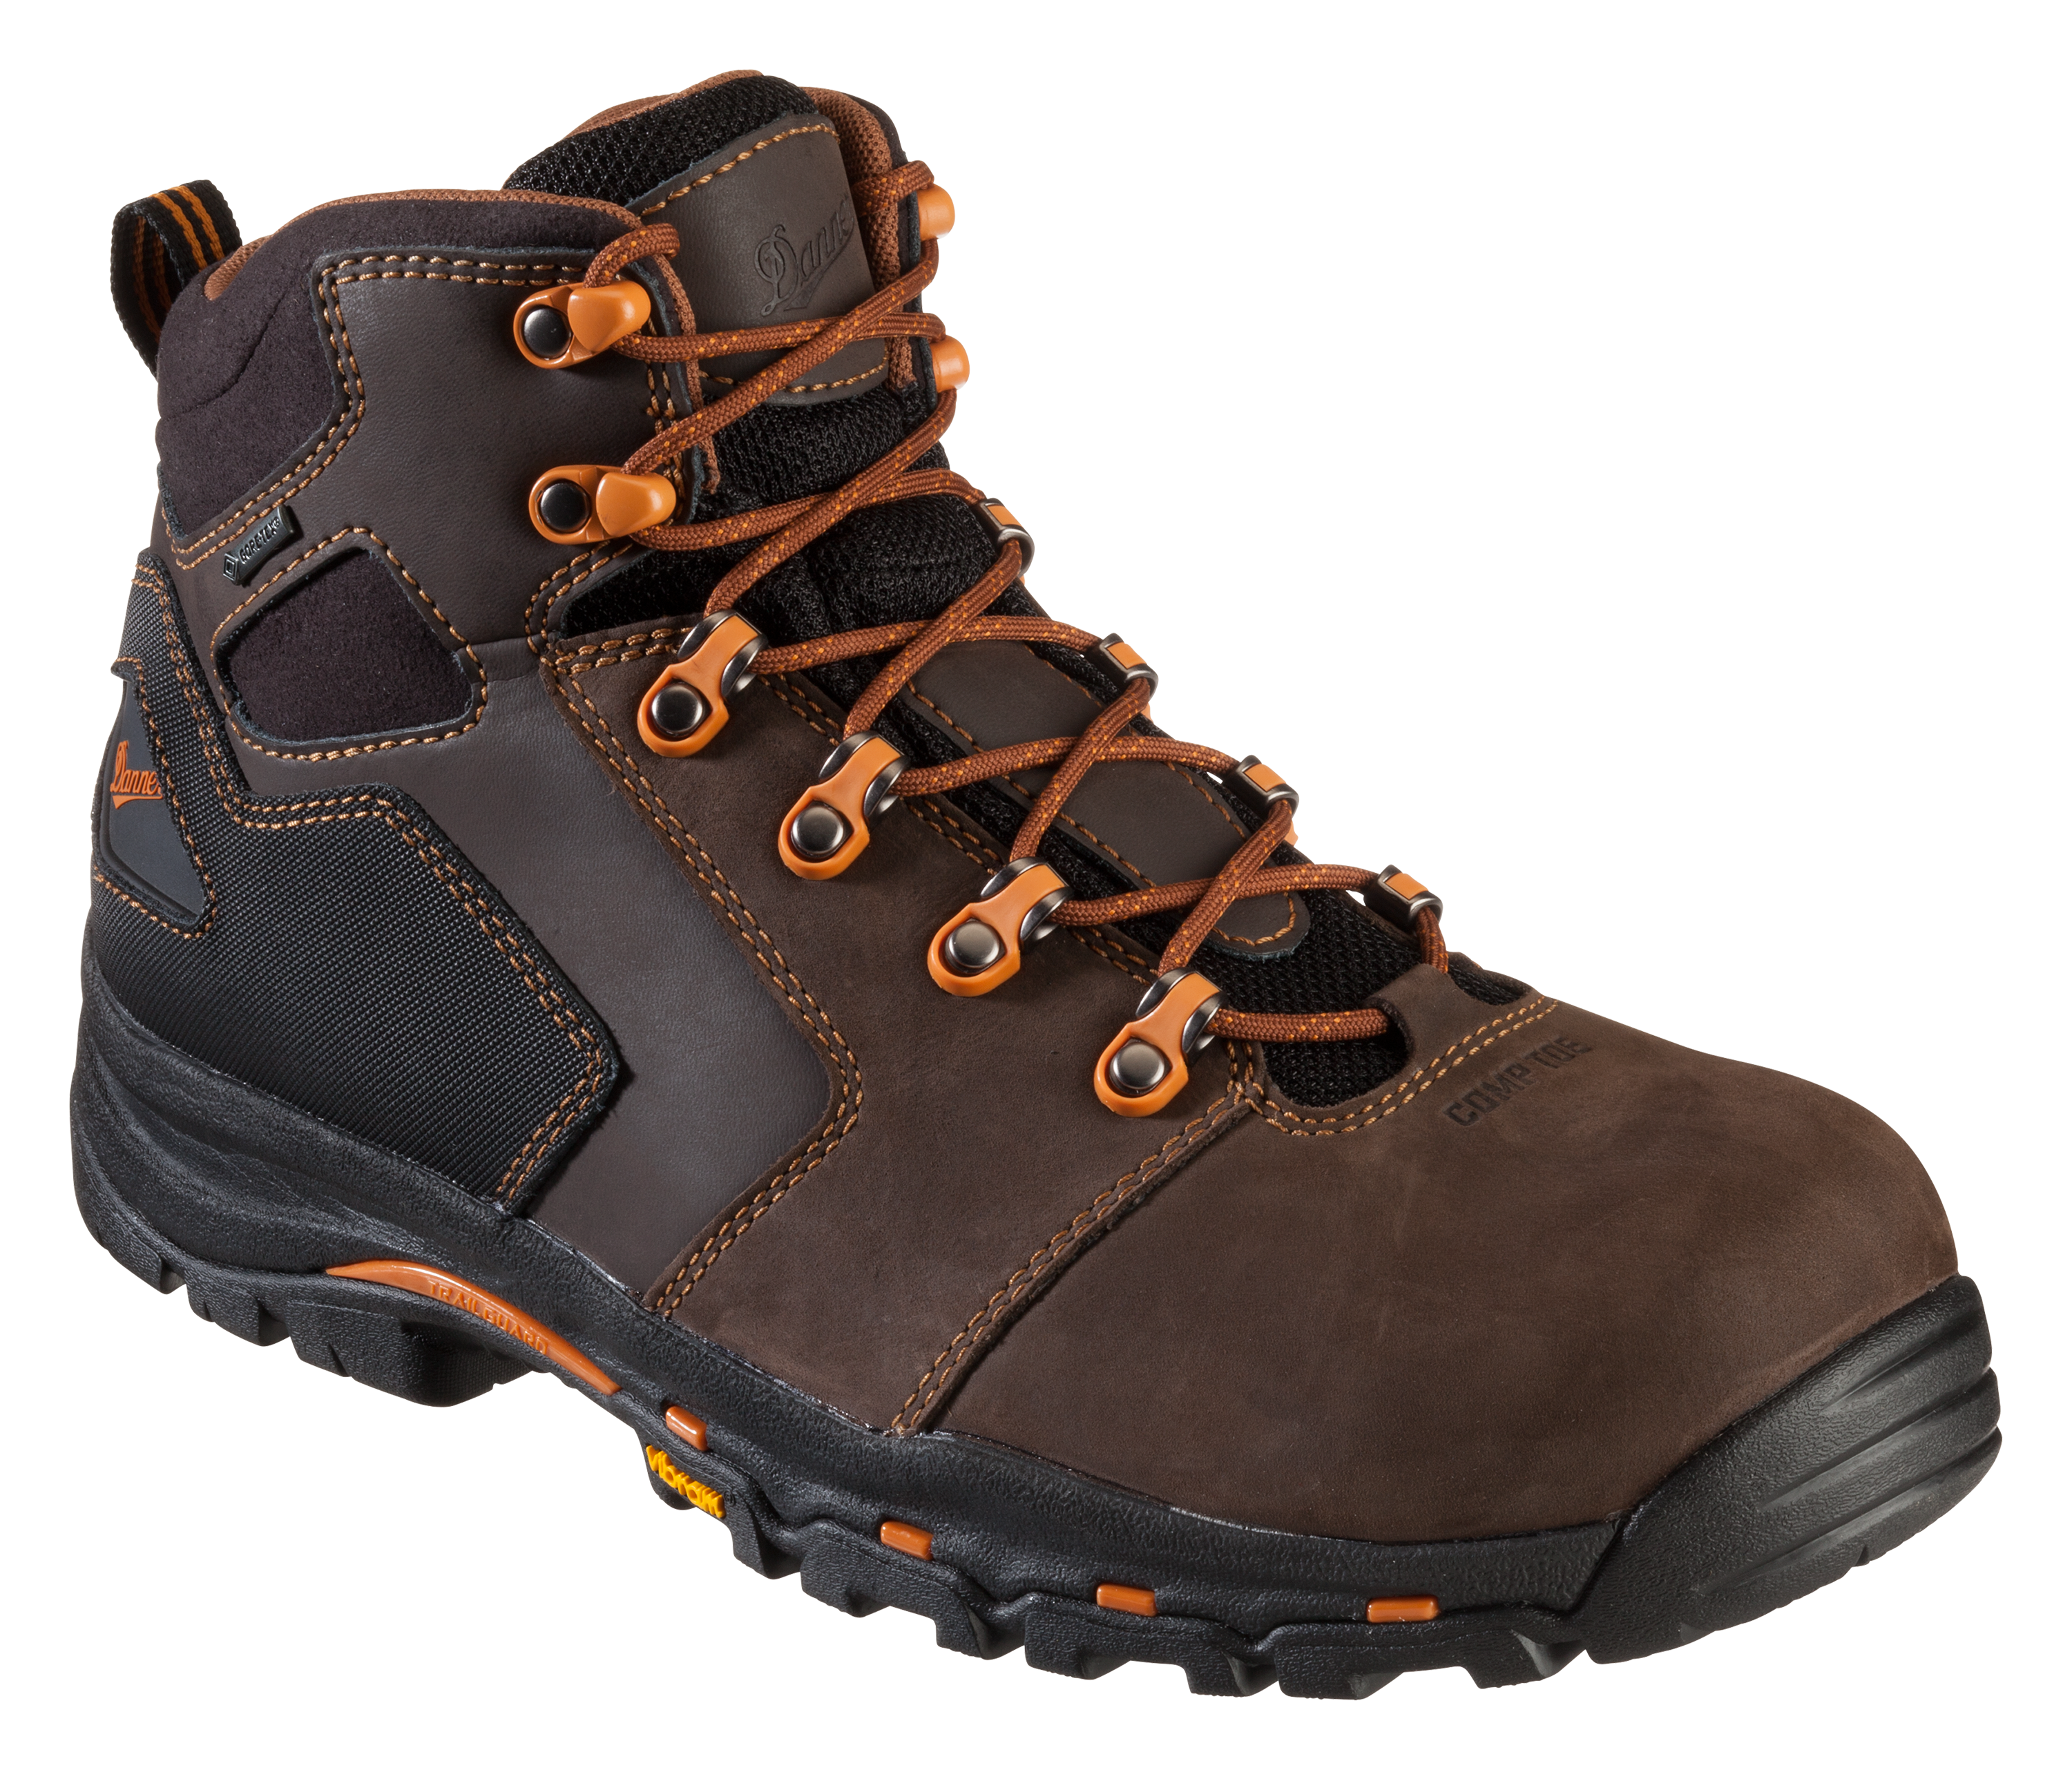 Danner Vicious GORE-TEX Non-Metallic Safety Toe Work Boots for Men - Brown - 10W